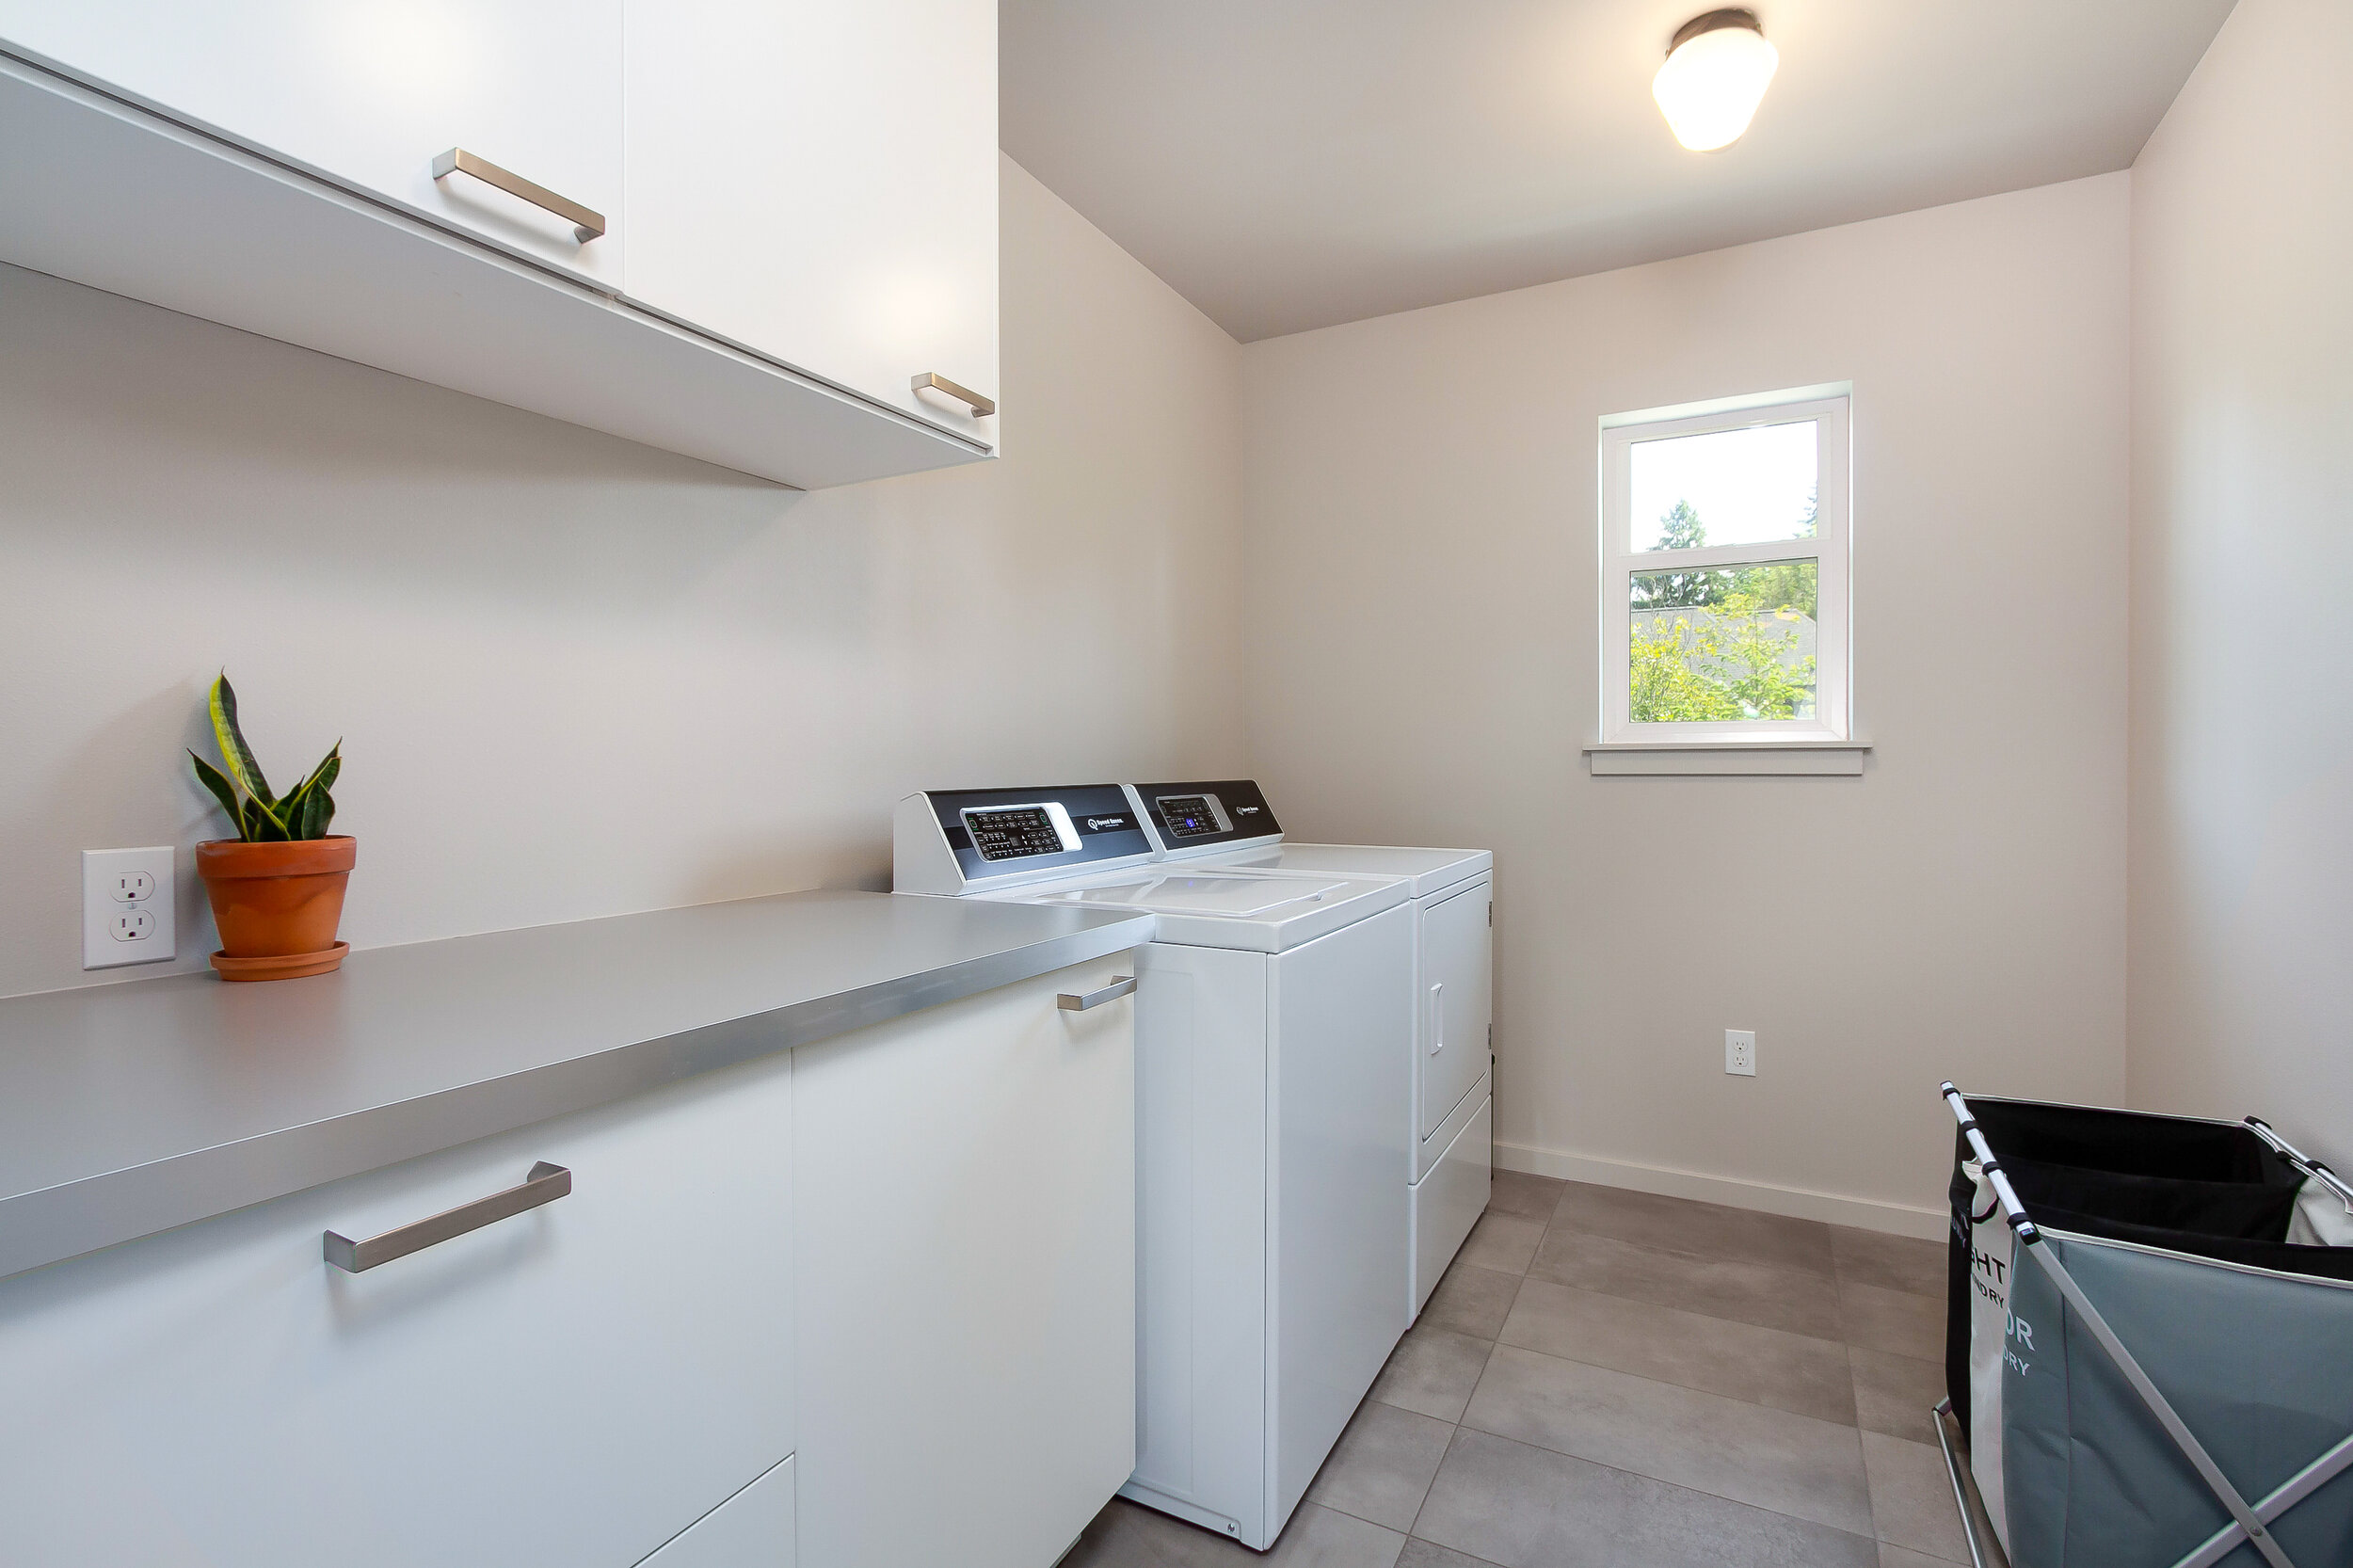 Laundry is a breeze in the generous laundry room, with ample counter space for folding and sorting. 